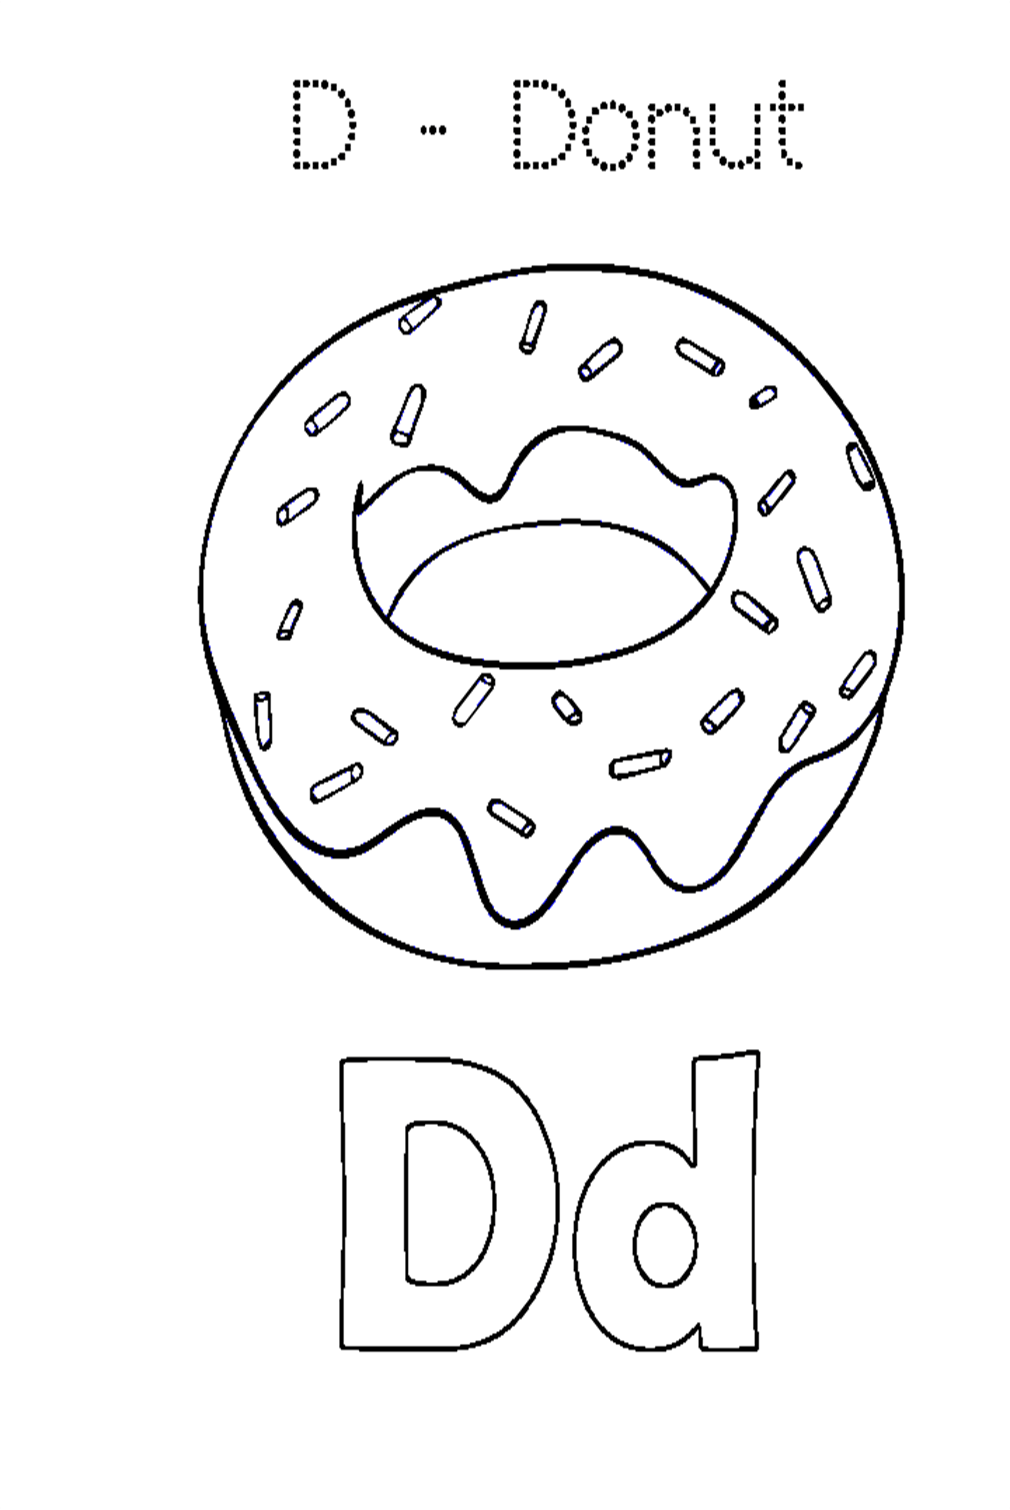 Donut To Color from Donut